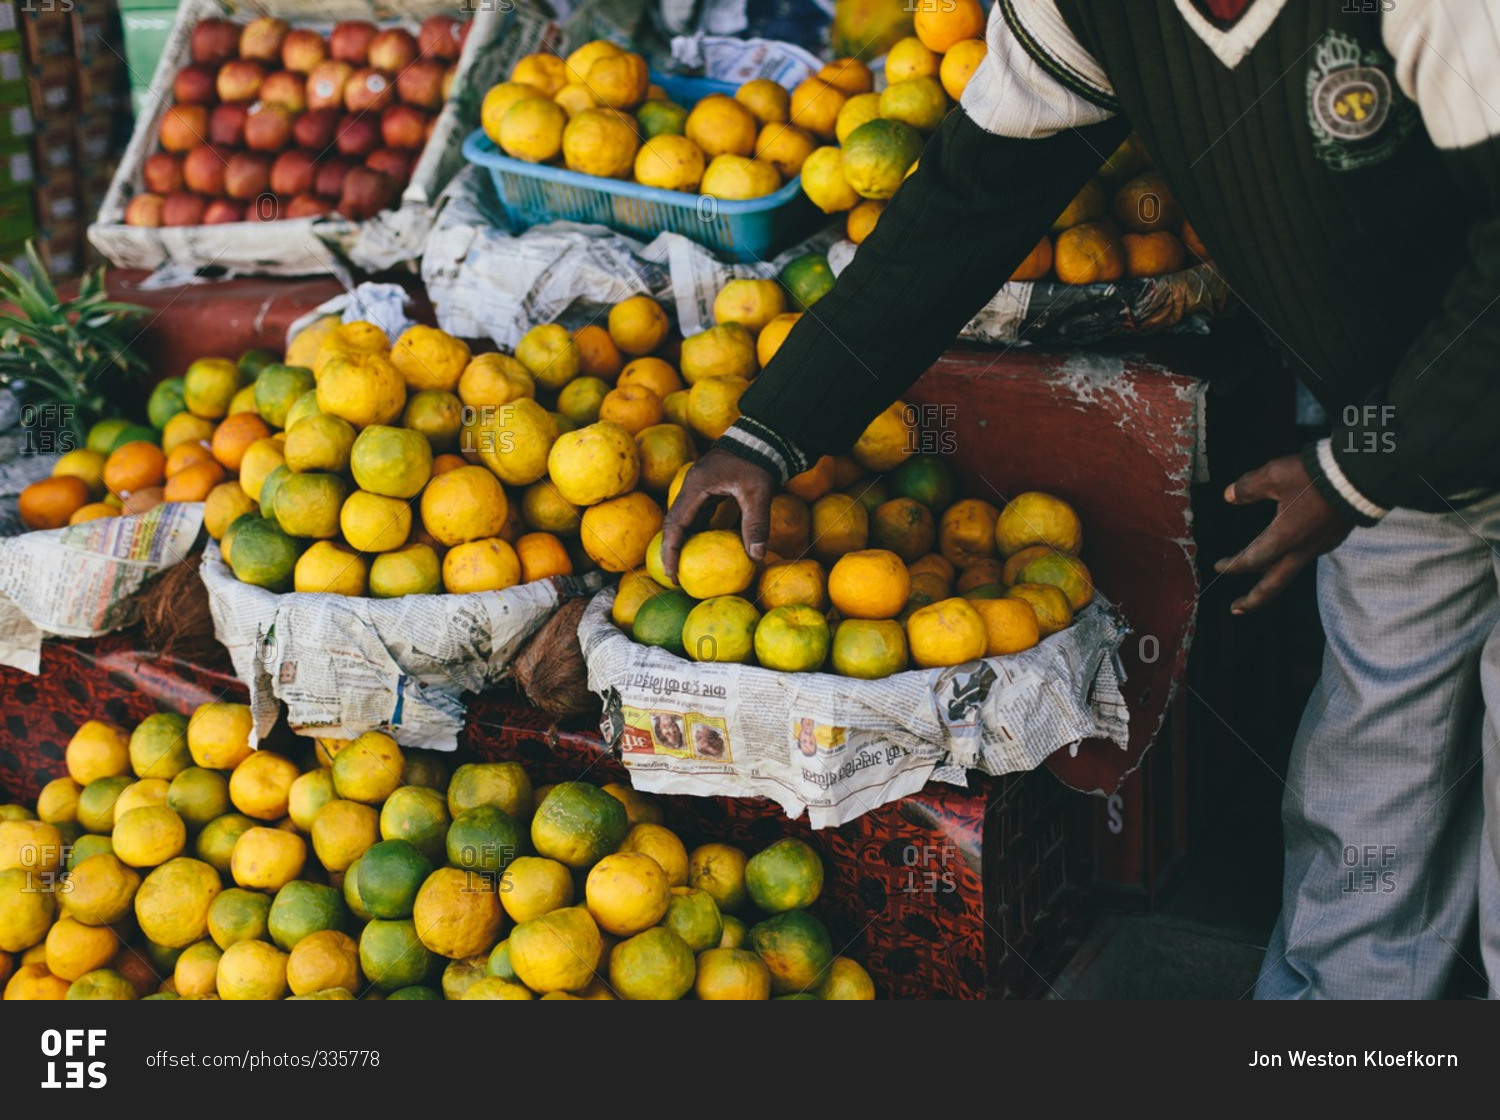 Man picking citrus fruit from a fruit stand in India